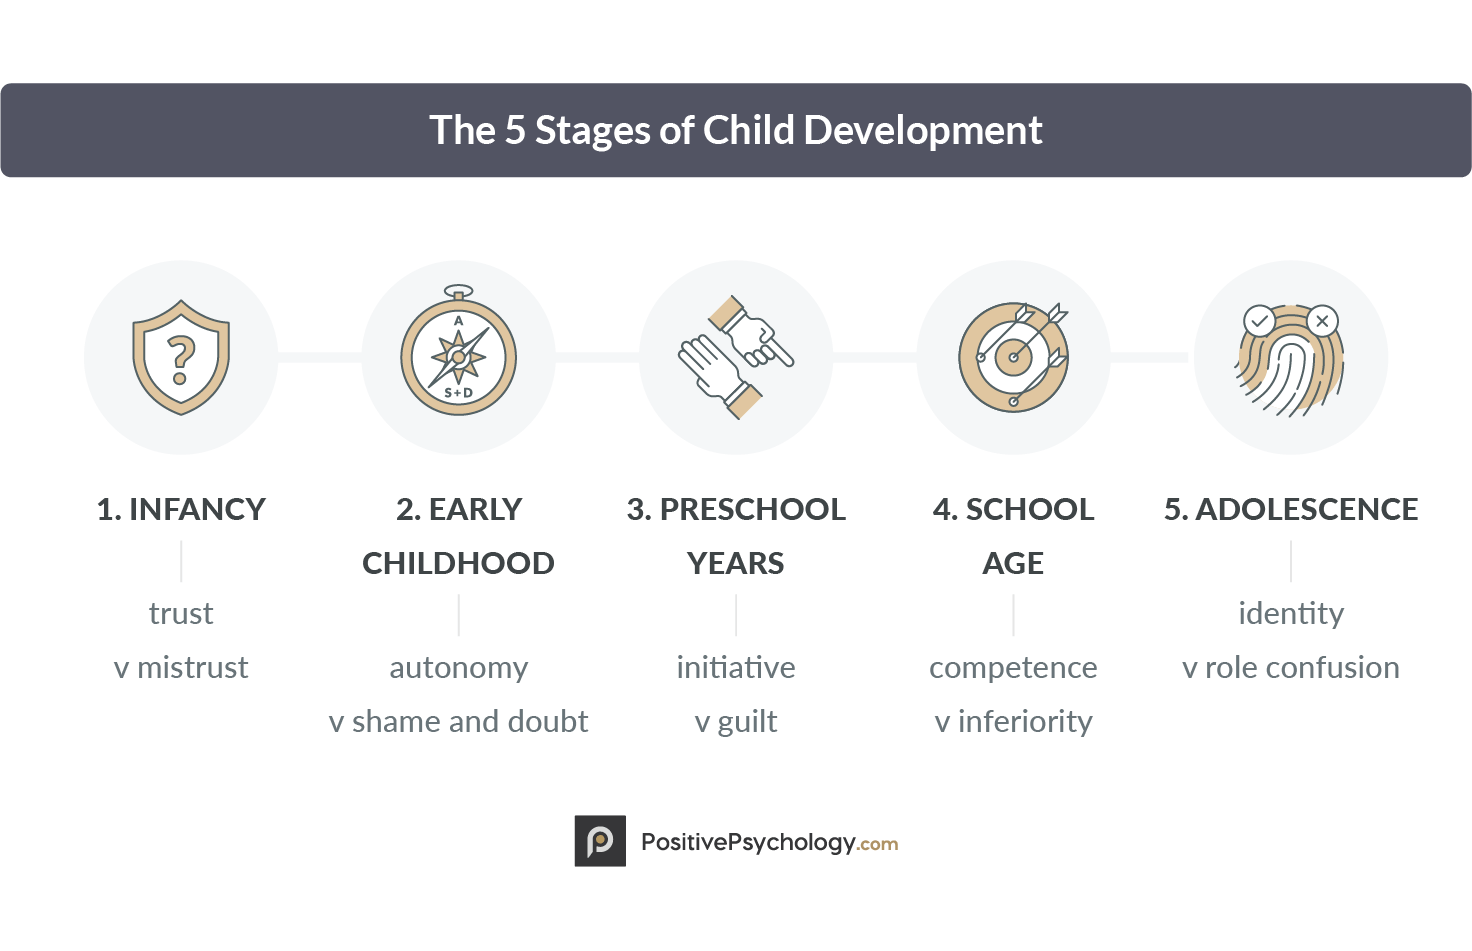 The 5 Stages of Child Development